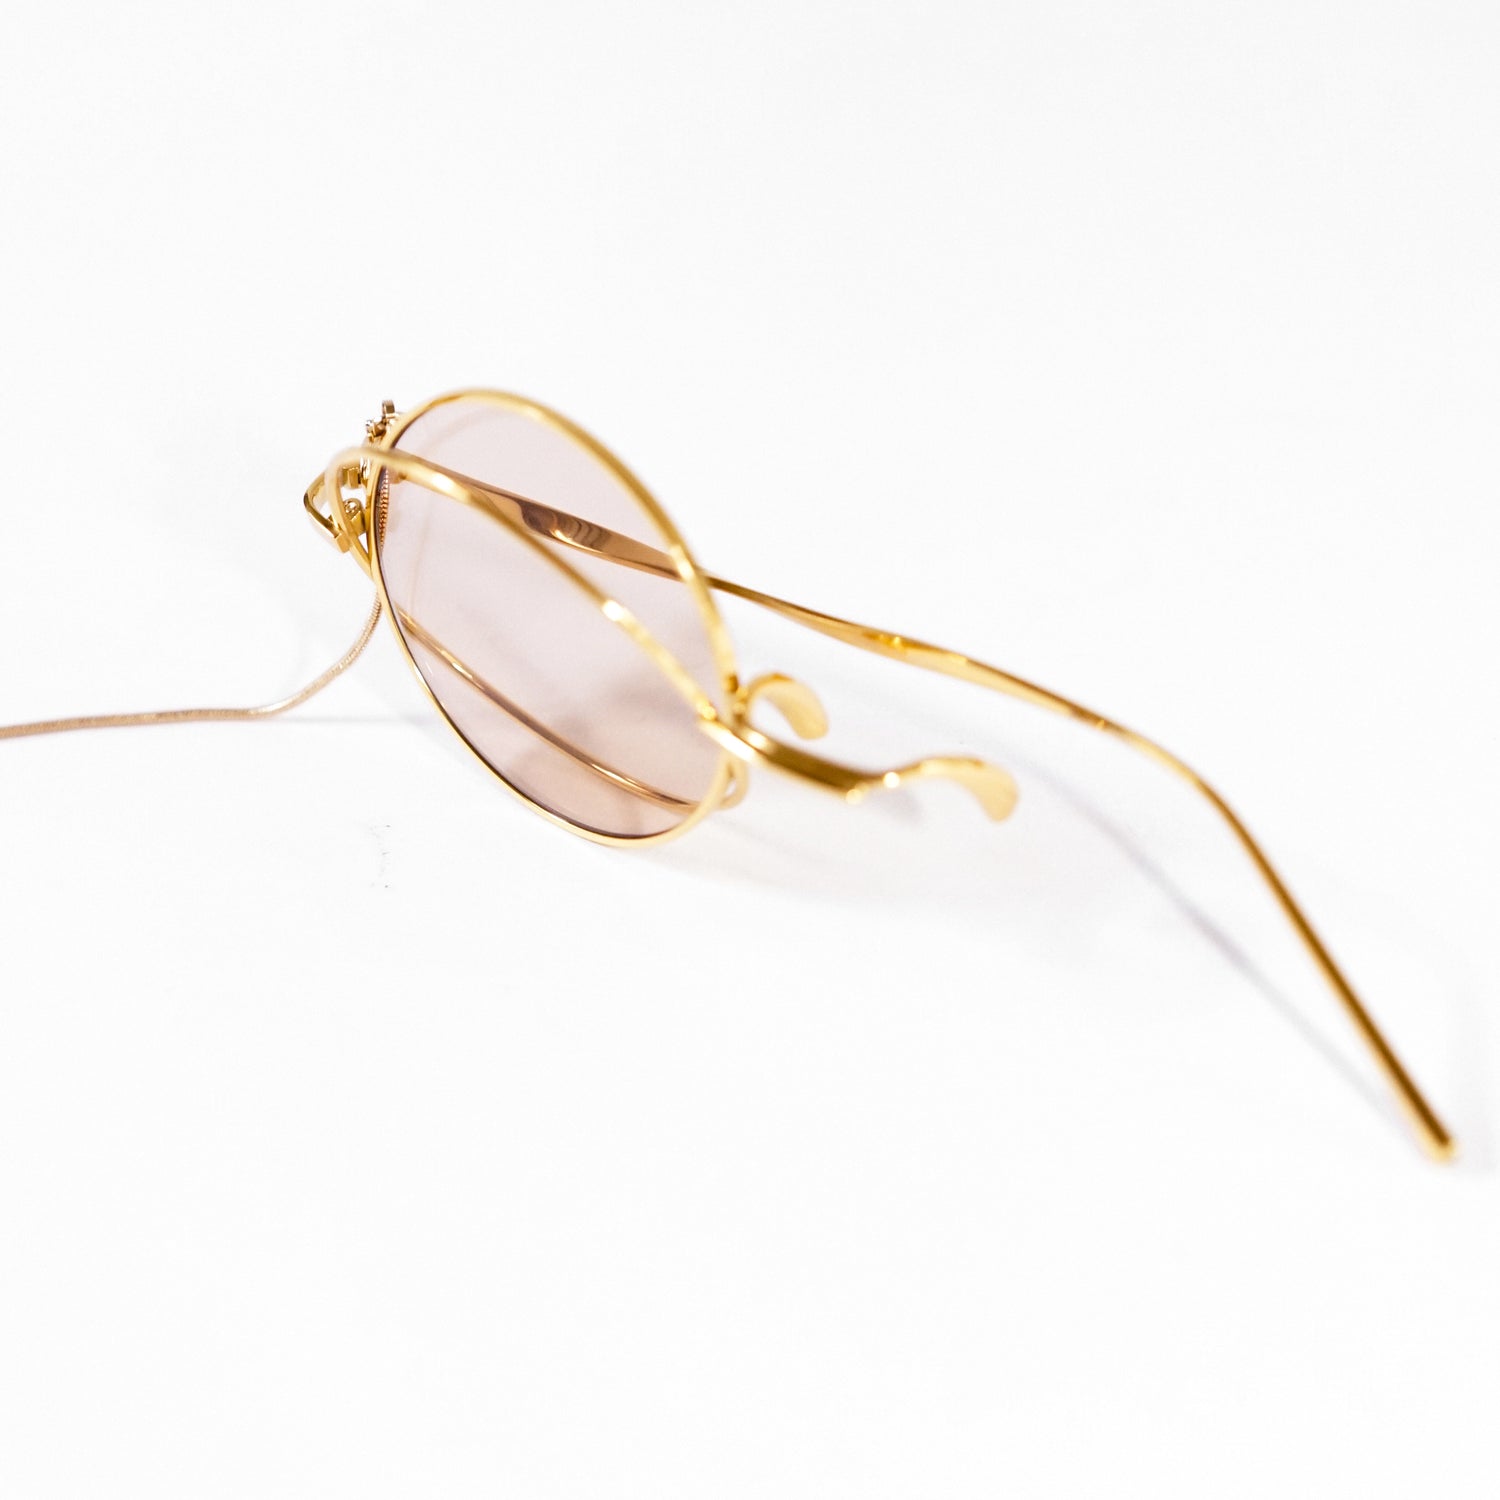 round crossed rims monocle with chain in gold colour 45 angled